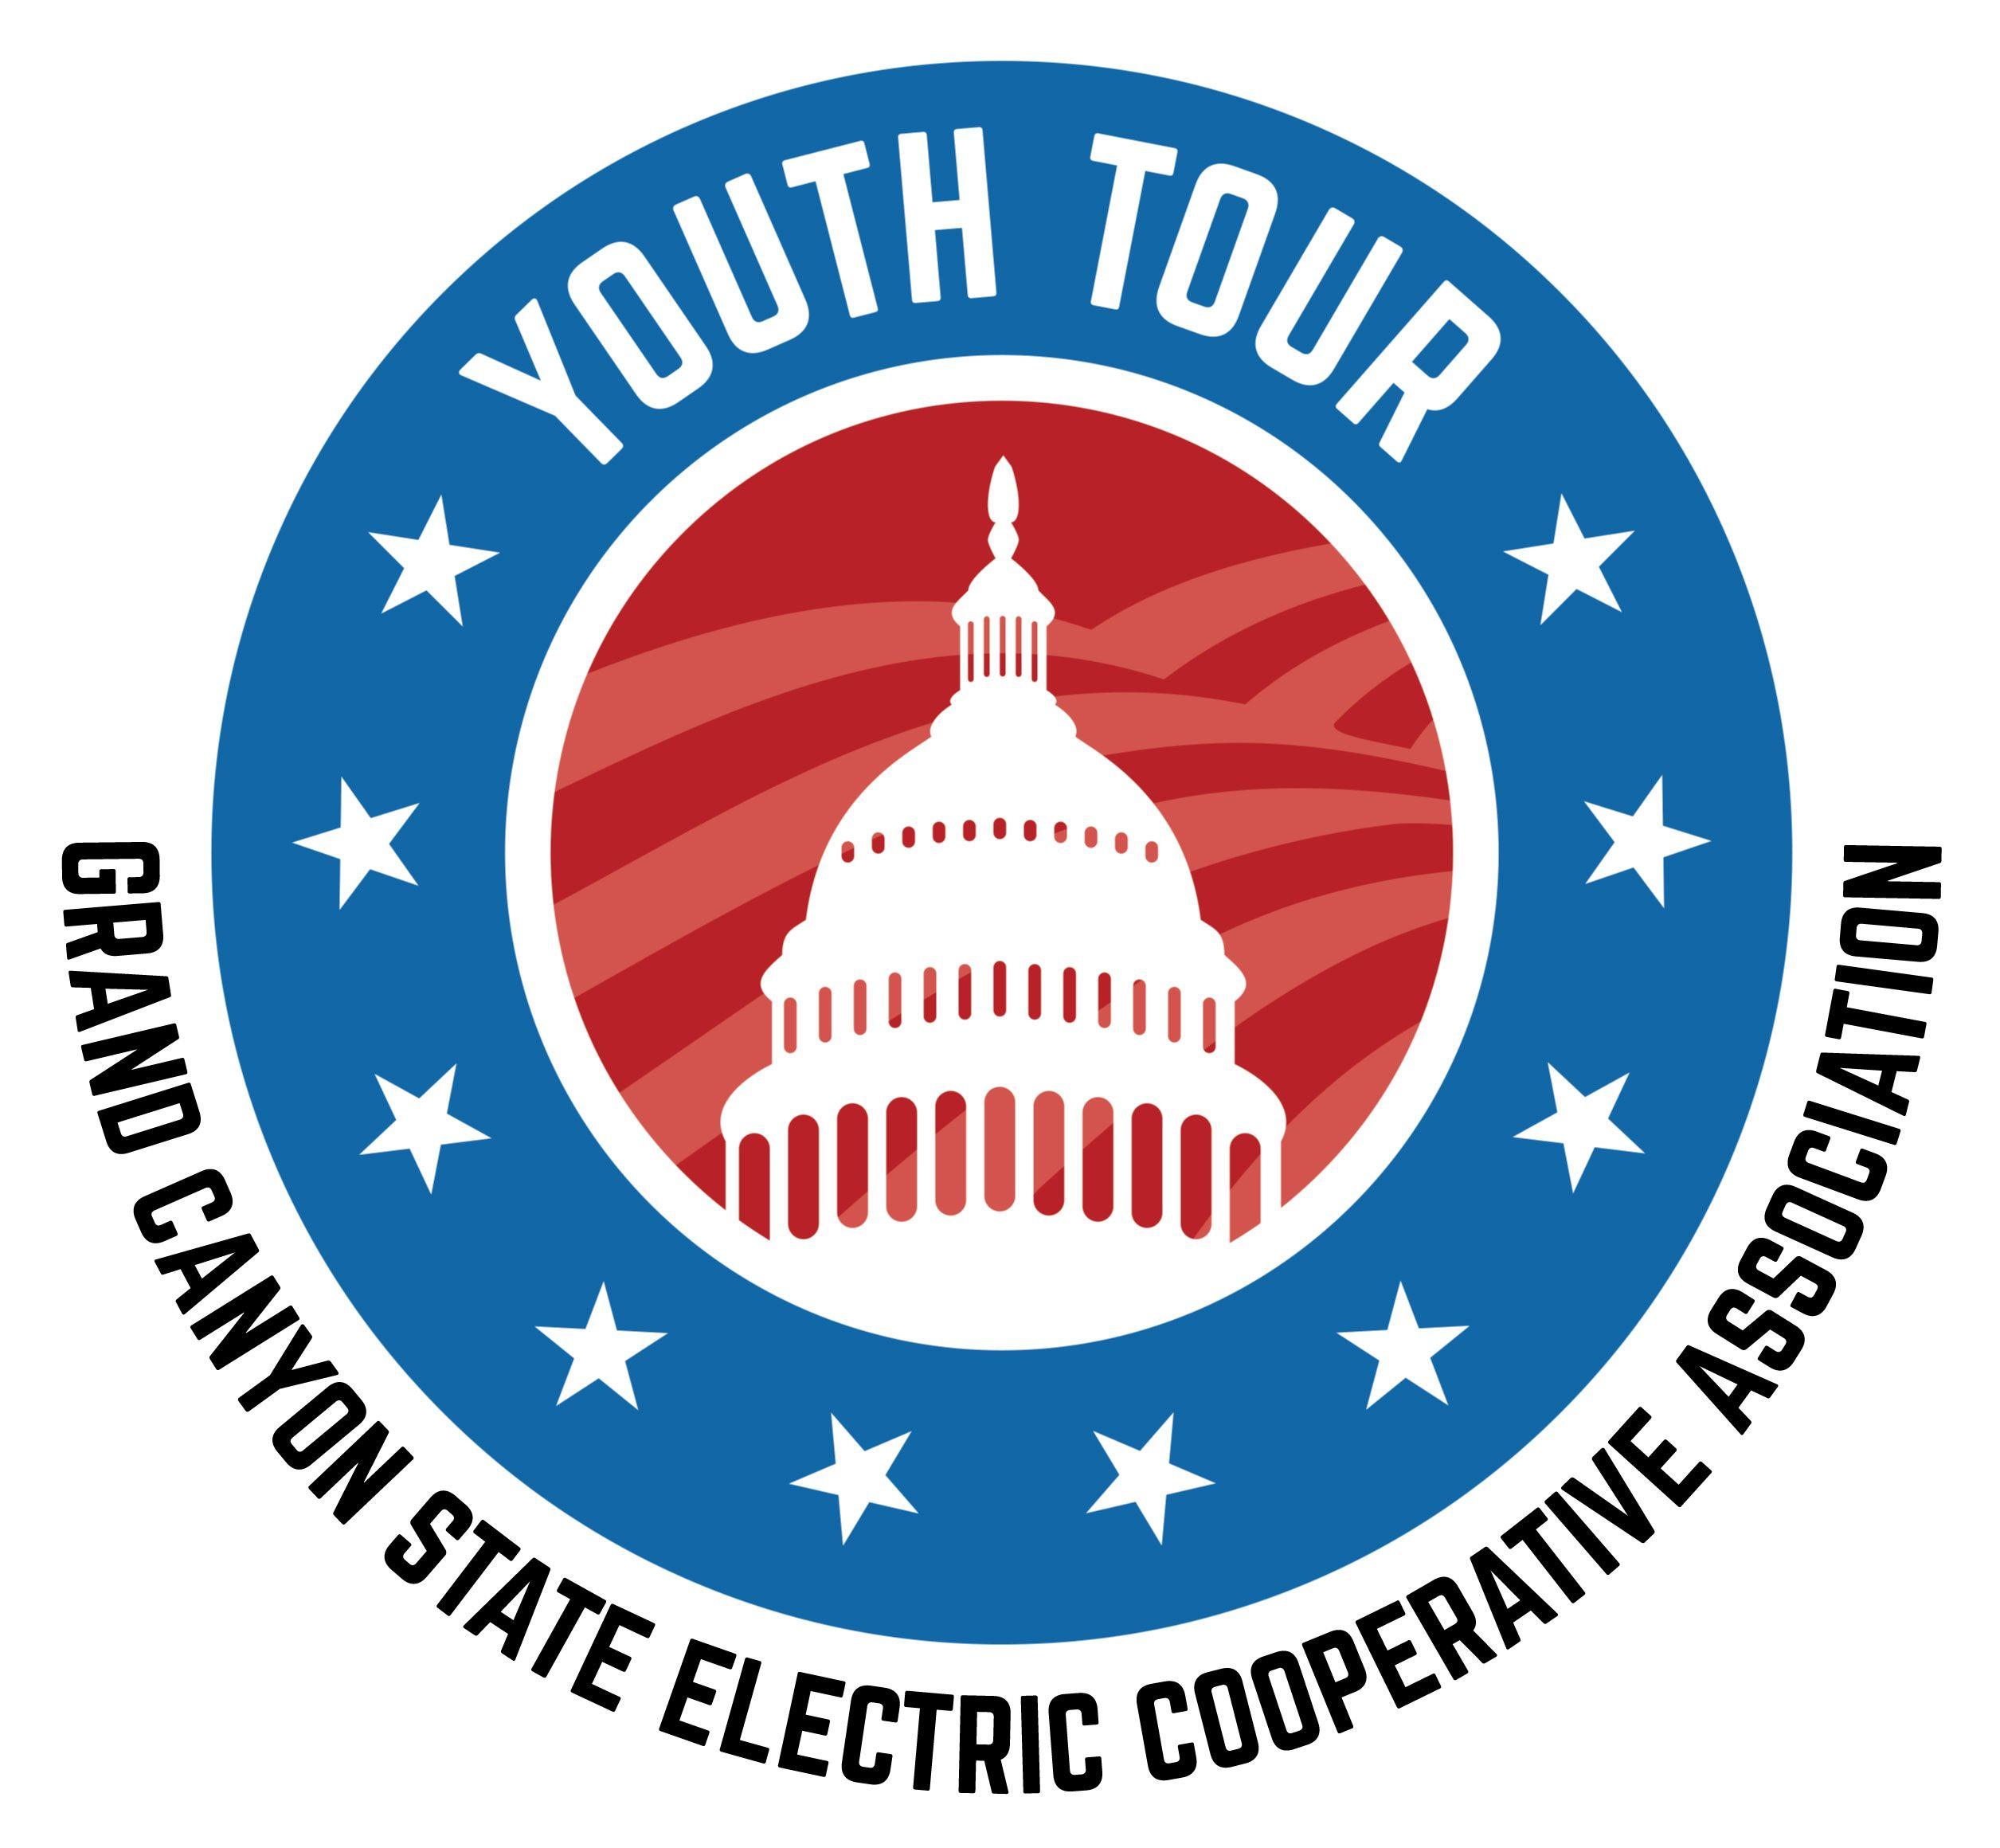 Grand Canyon State Logo - Youth Tour. Grand Canyon State Electric Cooperative Association